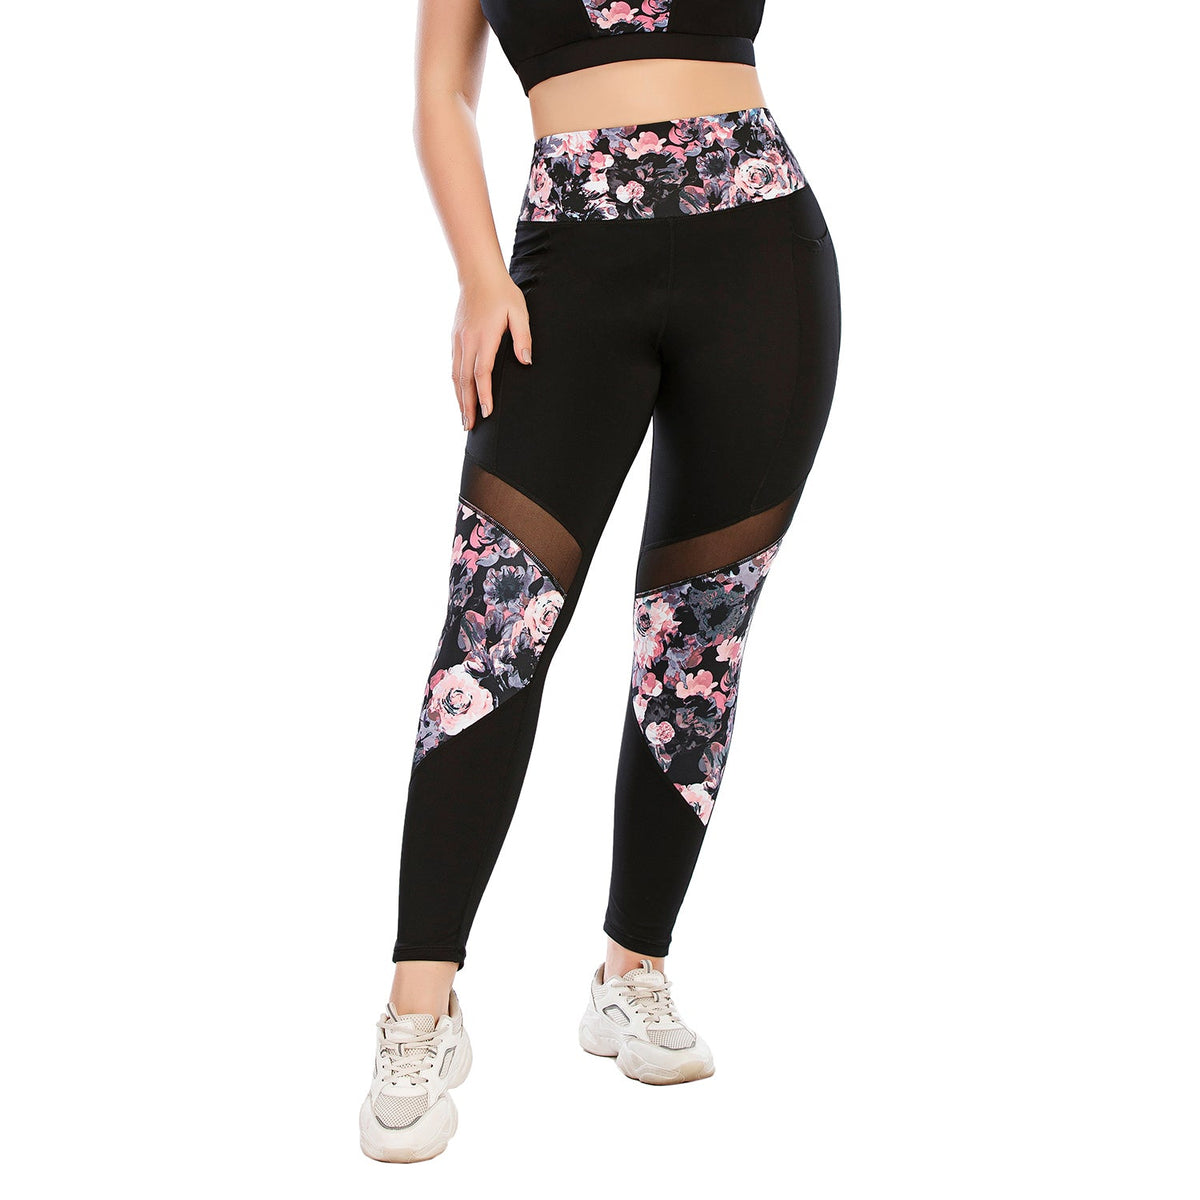 Plus Size Yoga Workout Legging for Printed